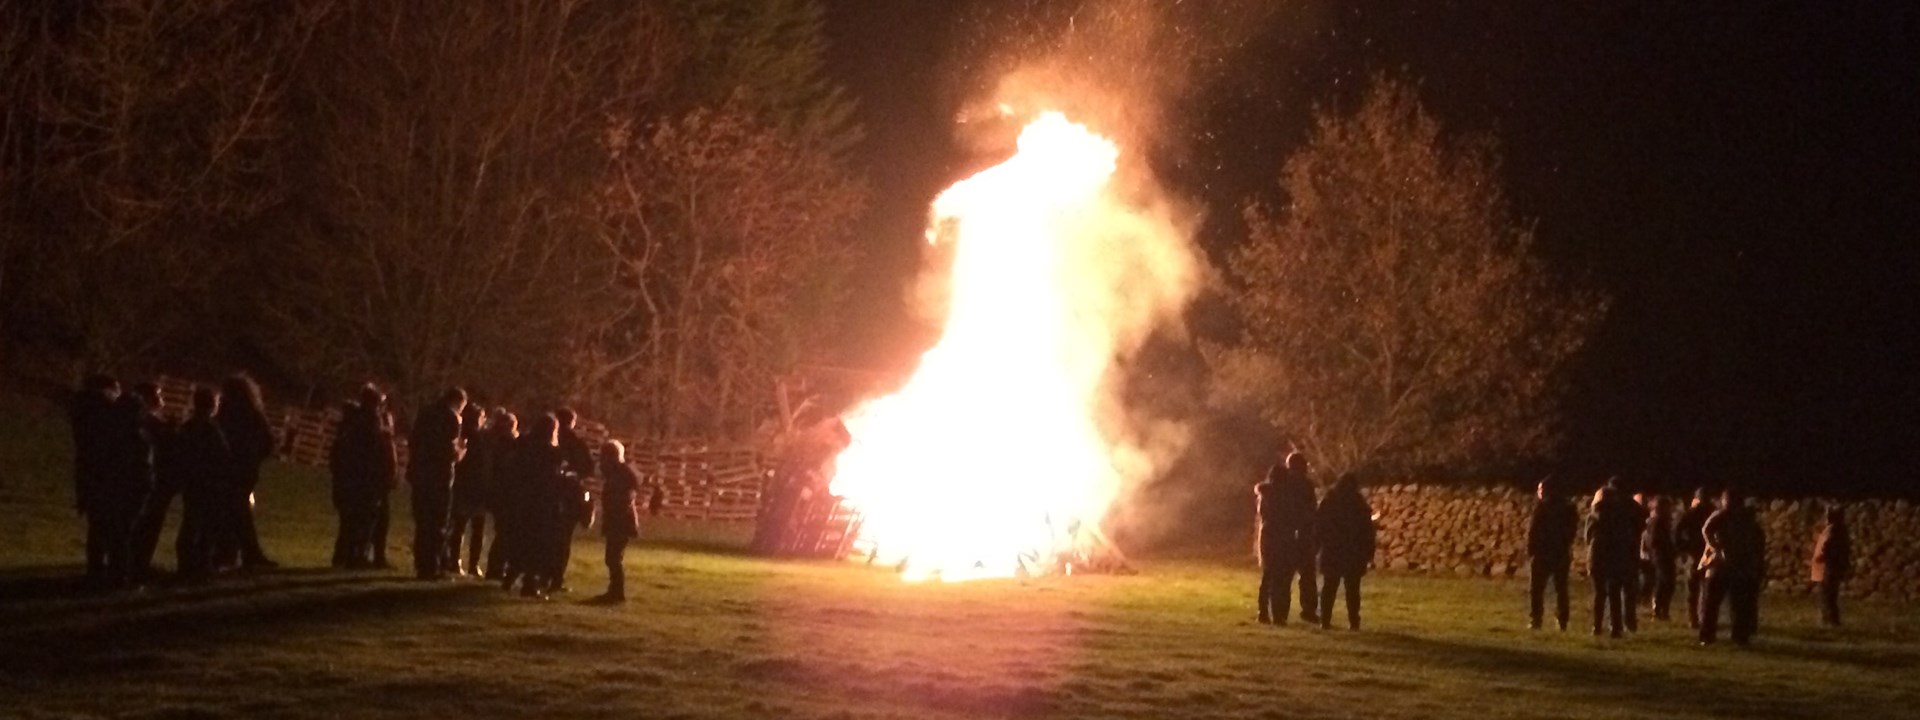 Stainforth bonfire group